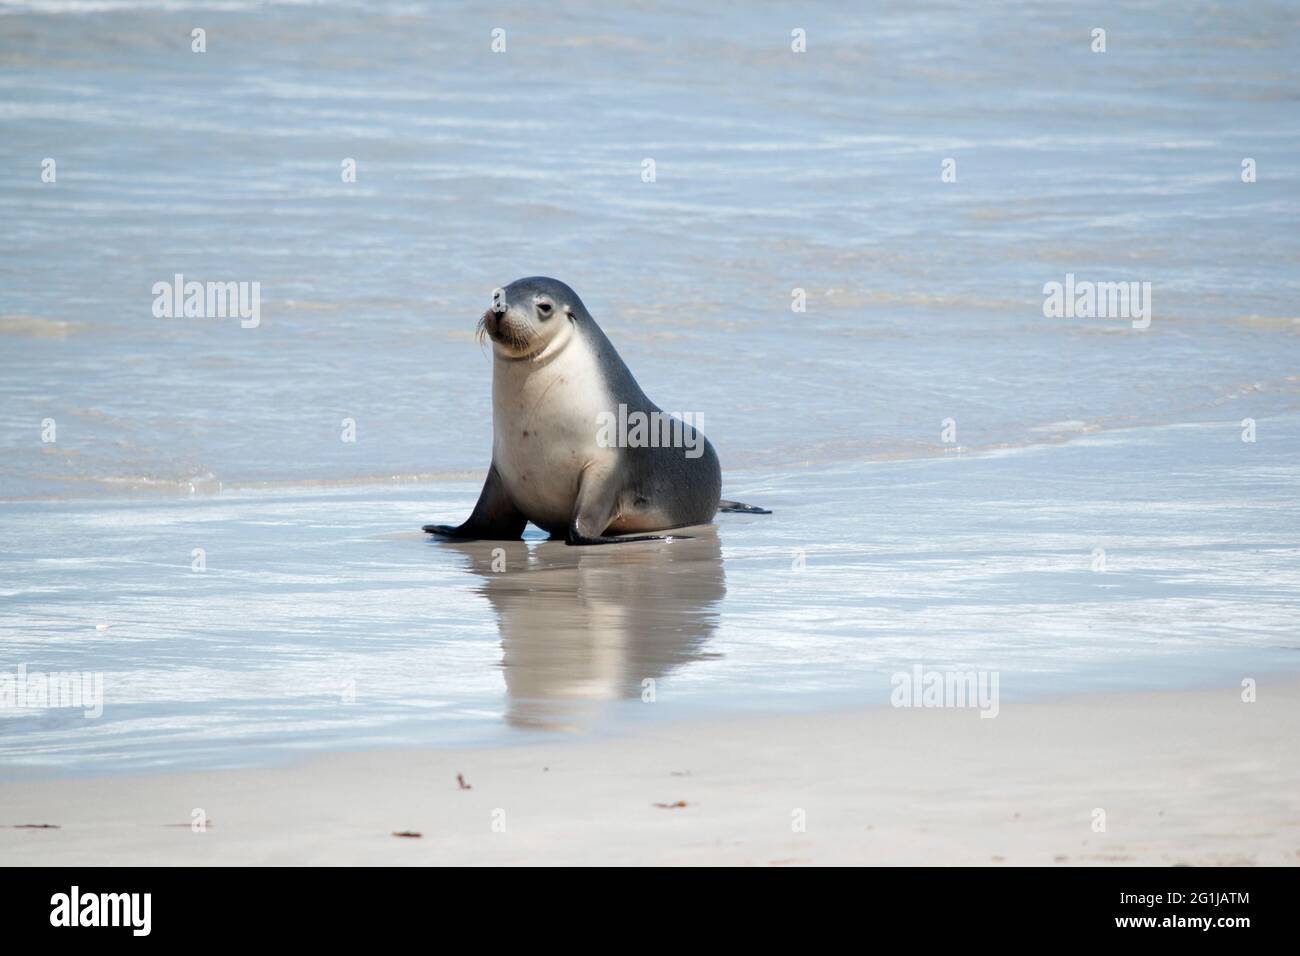 the sea lion is walking on the beach Stock Photo